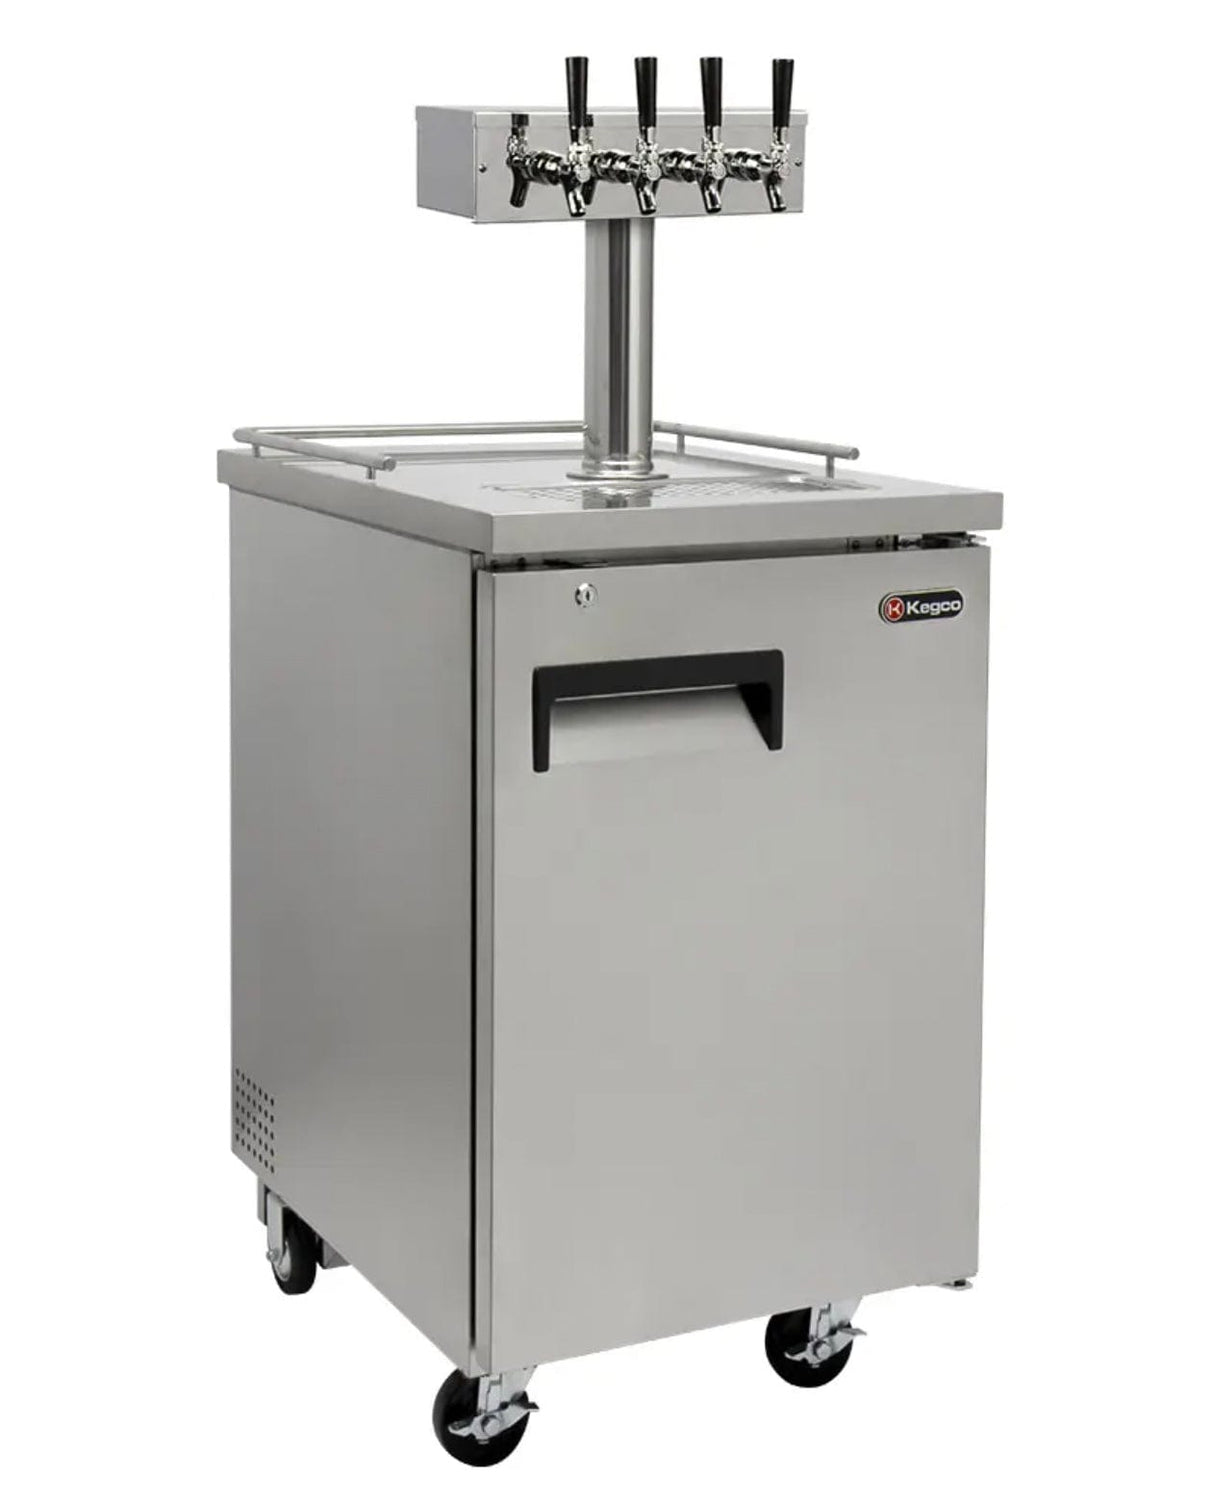 Kegco 24" Wide Four Tap All Stainless Steel Commercial Kegerator (XCK-1S-4)